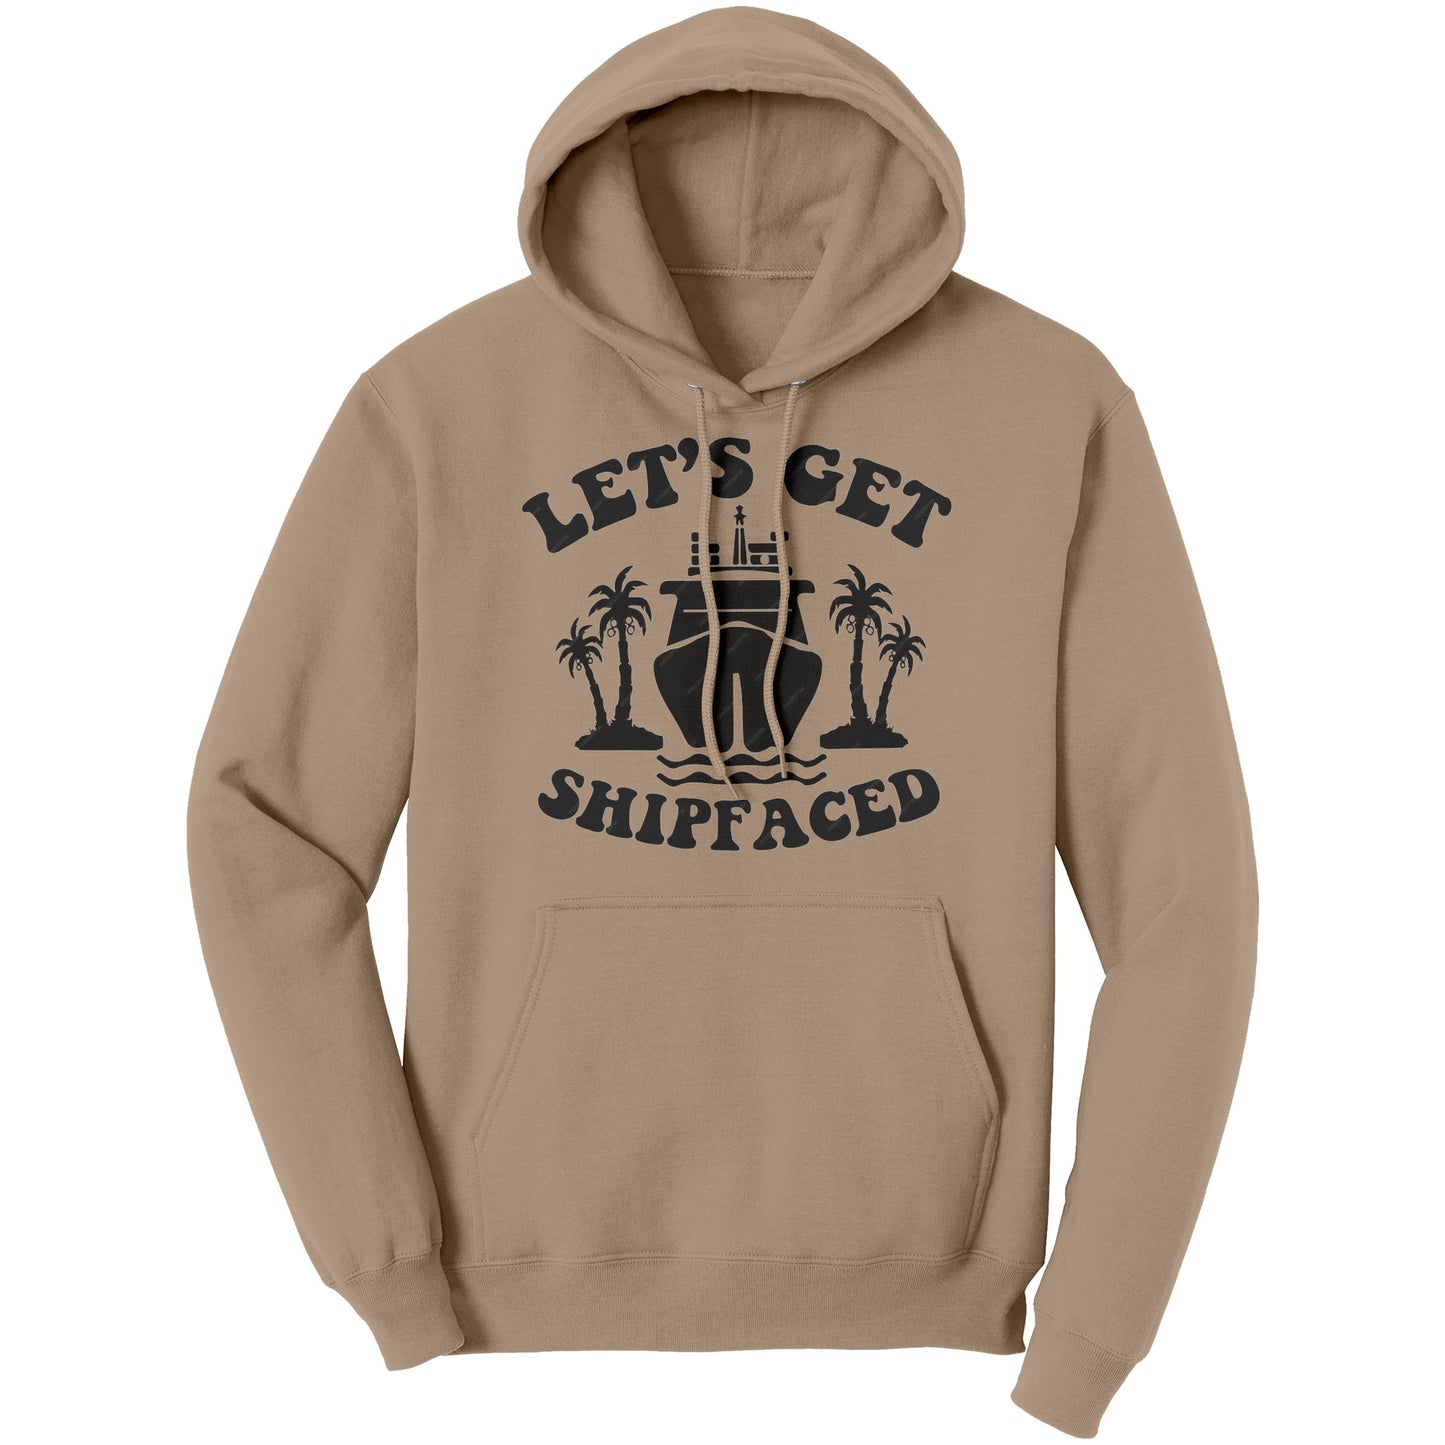 Hoodie Unisex Adult- Let's Get Shipped Faced